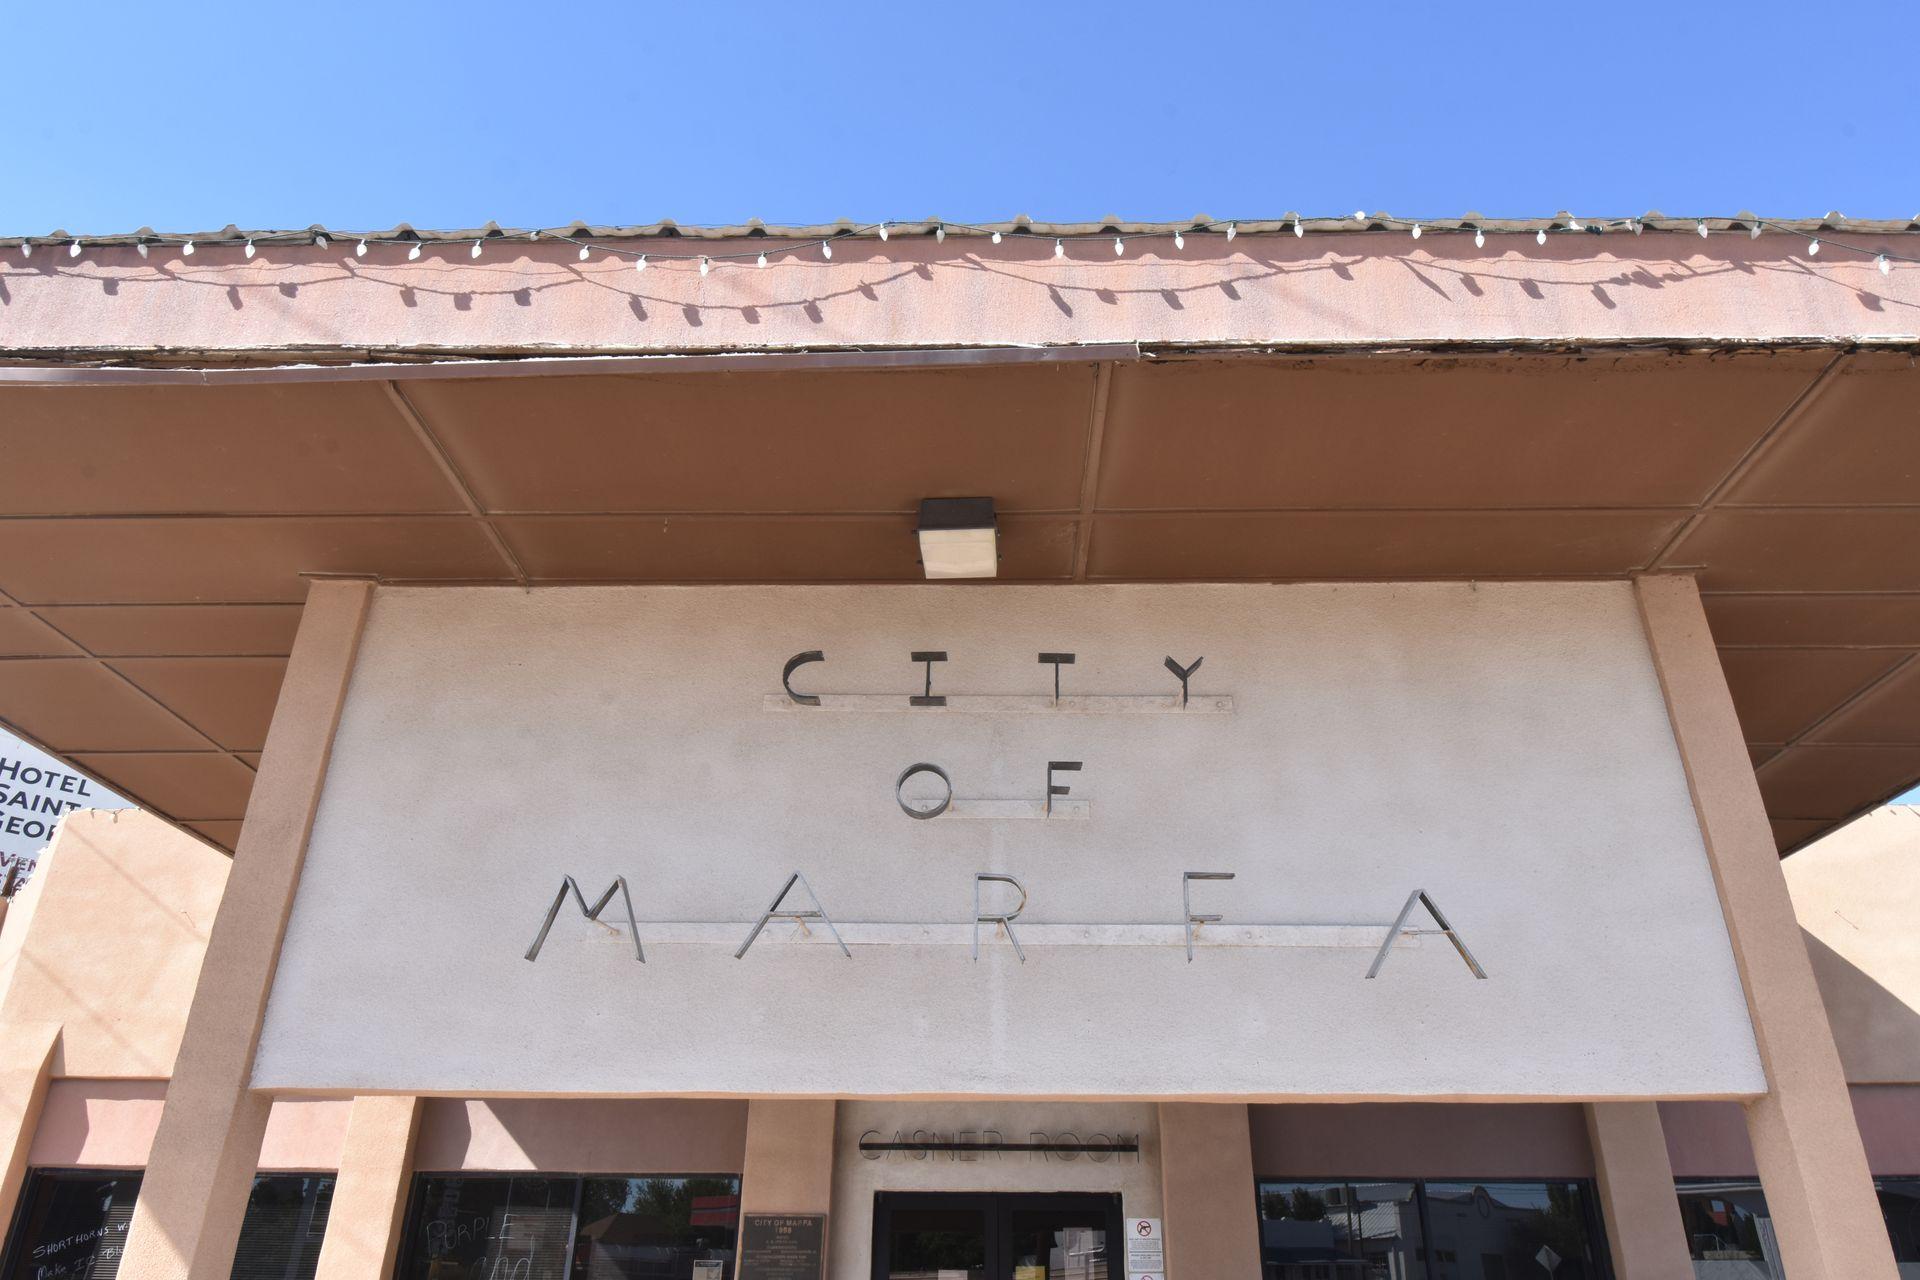 A pink, art deco style sign that reads 'City of Marfa'